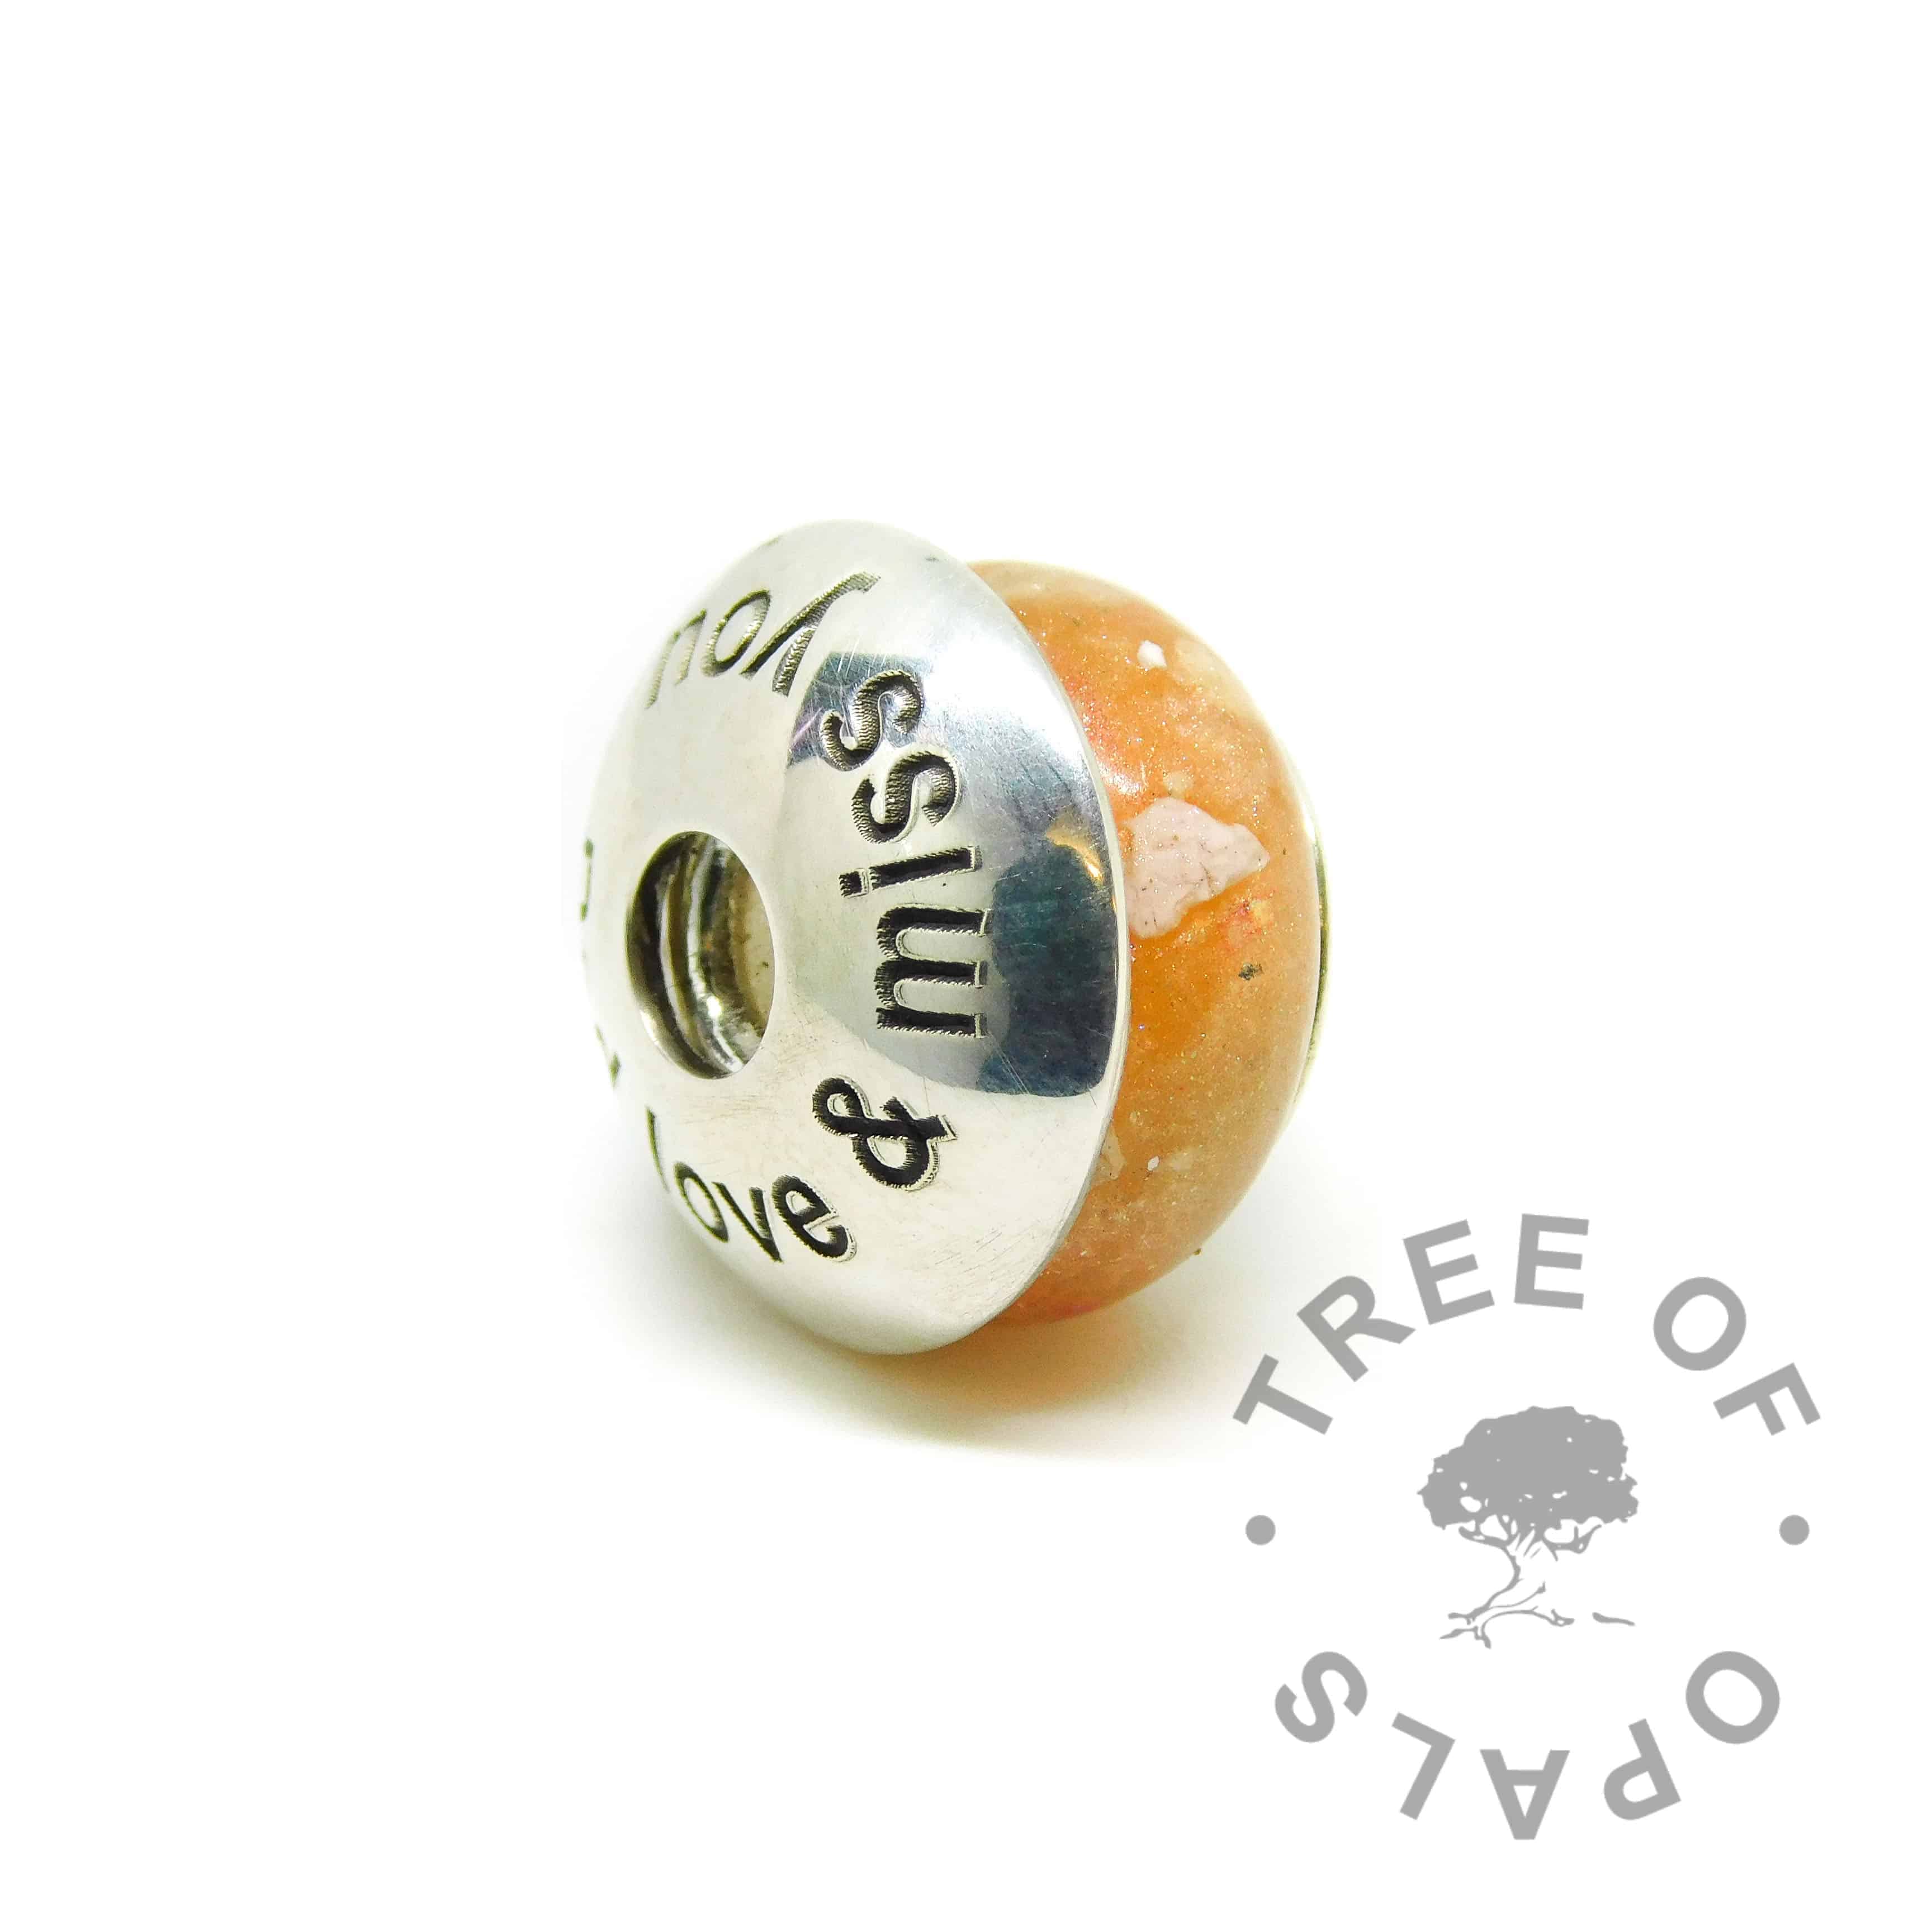 tangerine orange cremation ash charm shown with charm washer Arial font with Dad love & miss you. Sold separately